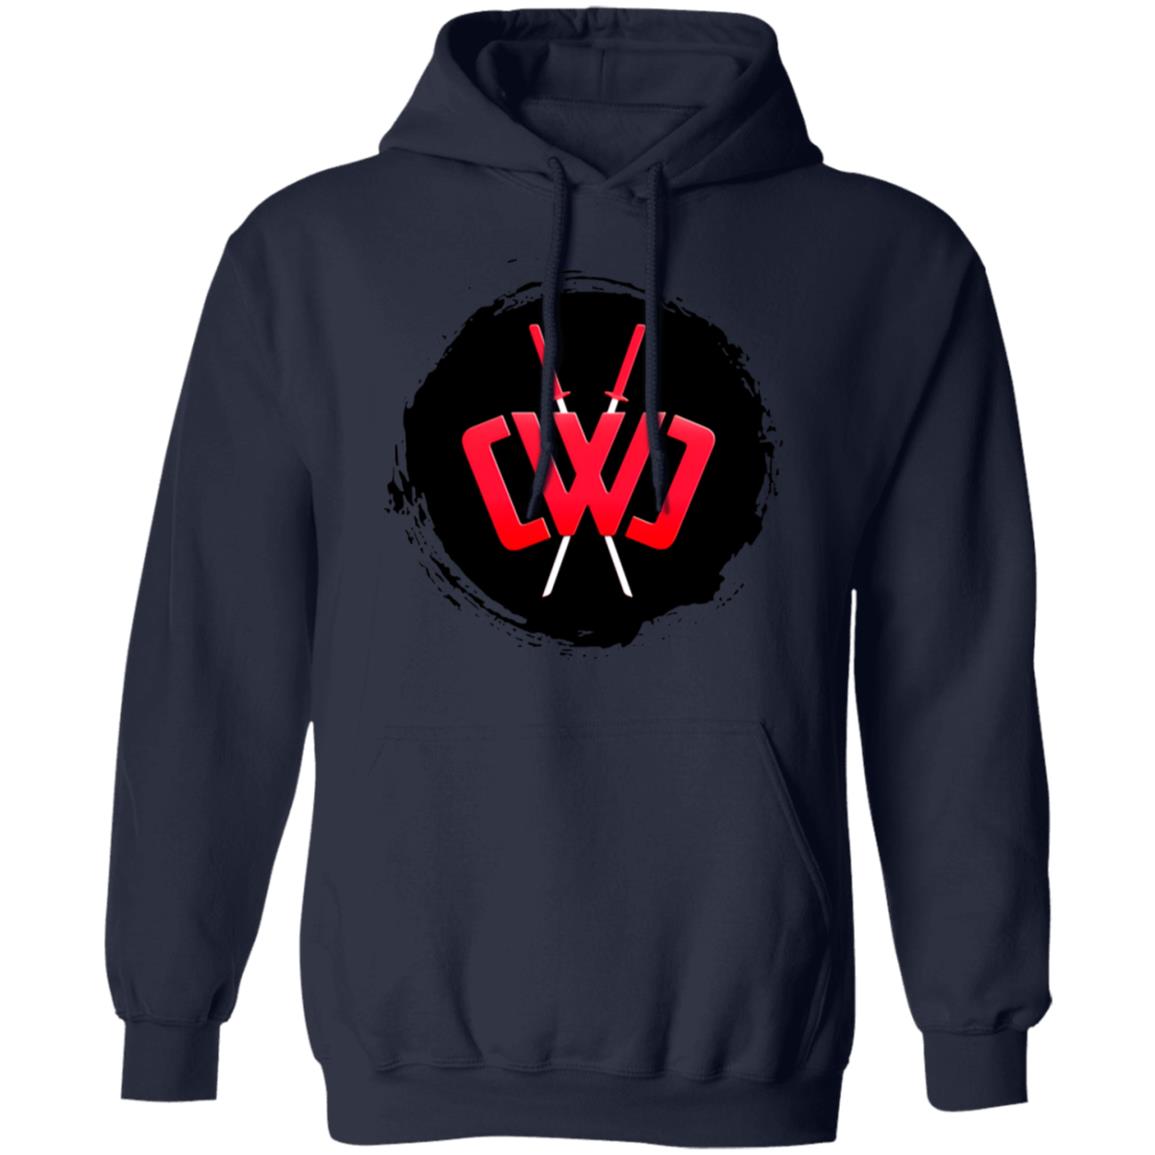 Cwc Merch Scorched Logo Hoodie - Tipatee